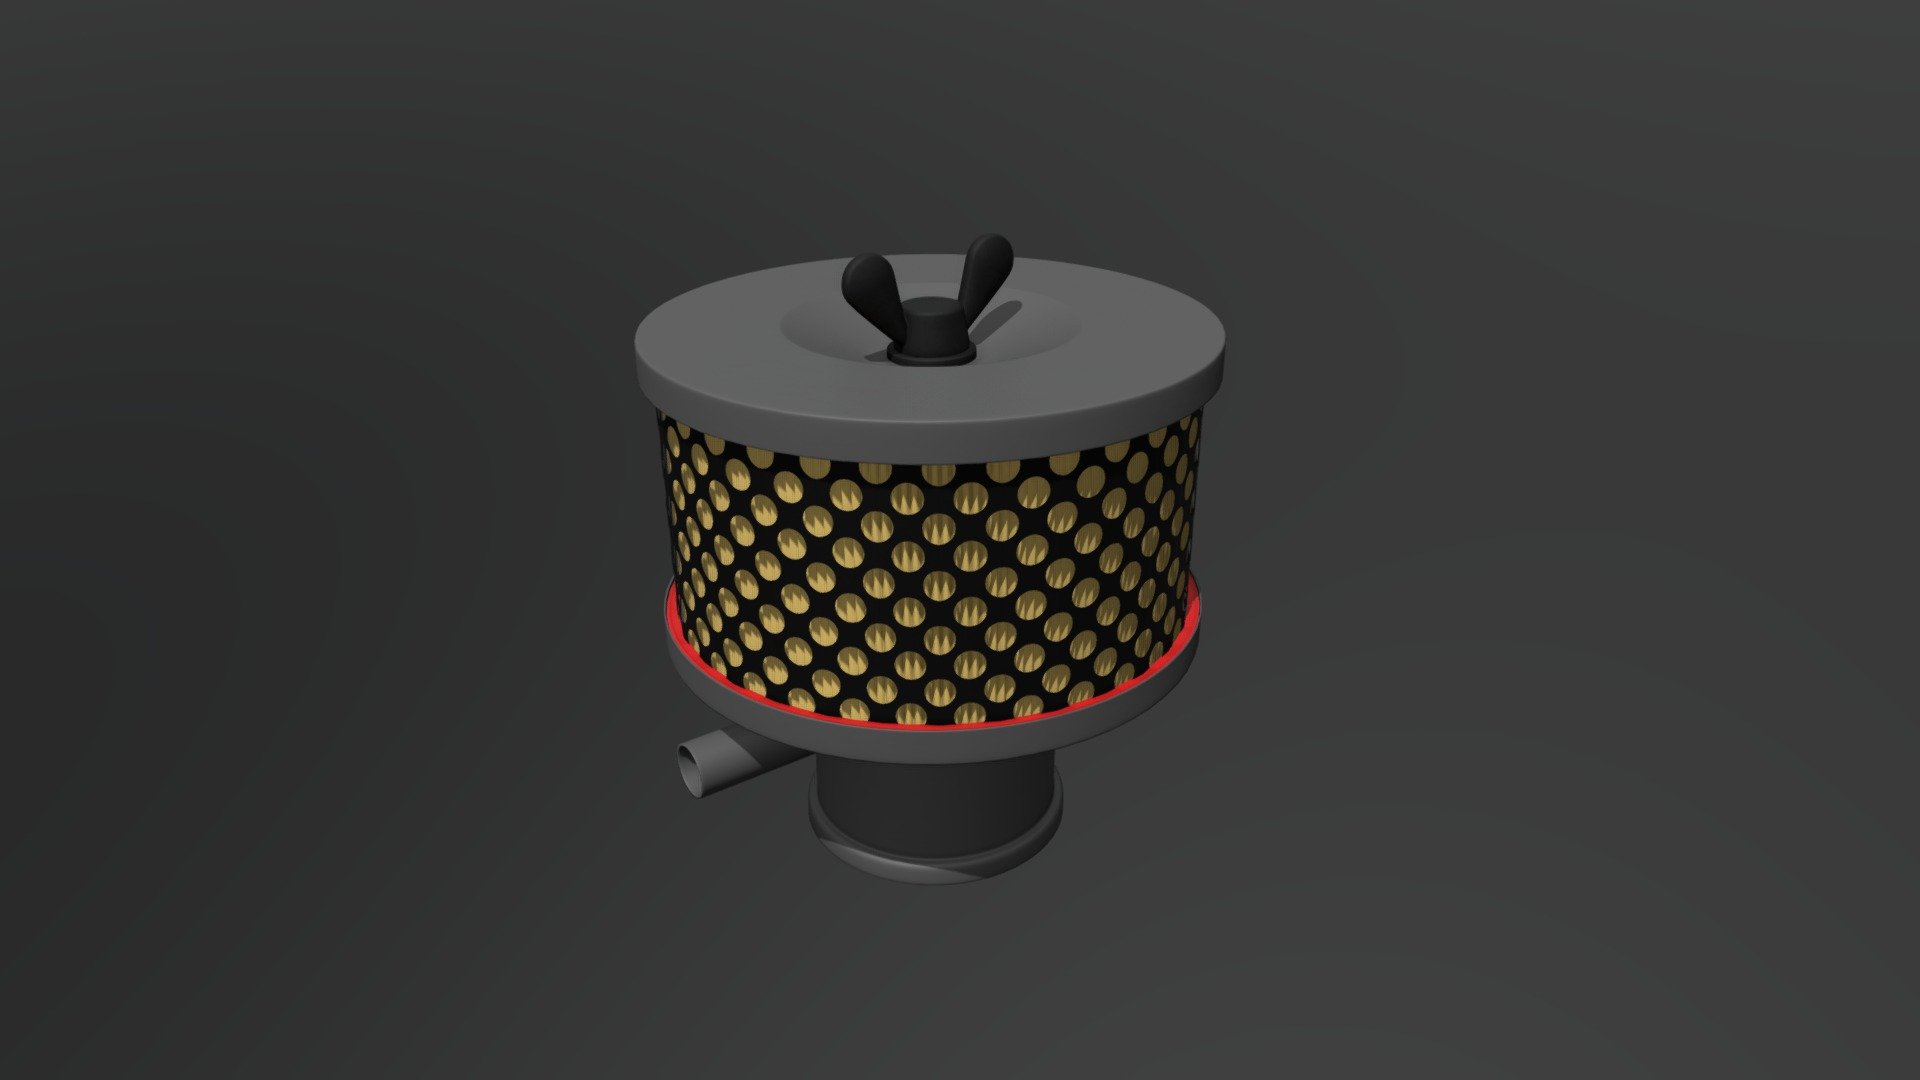 This model is based on the air cleaner filter for solex 32 carburettors that were fitted to the volkswagen sedan 1600cc and derivatives.

Low poly mesh with PBR texture maps in 4K can receive 2k textures easily 3d model